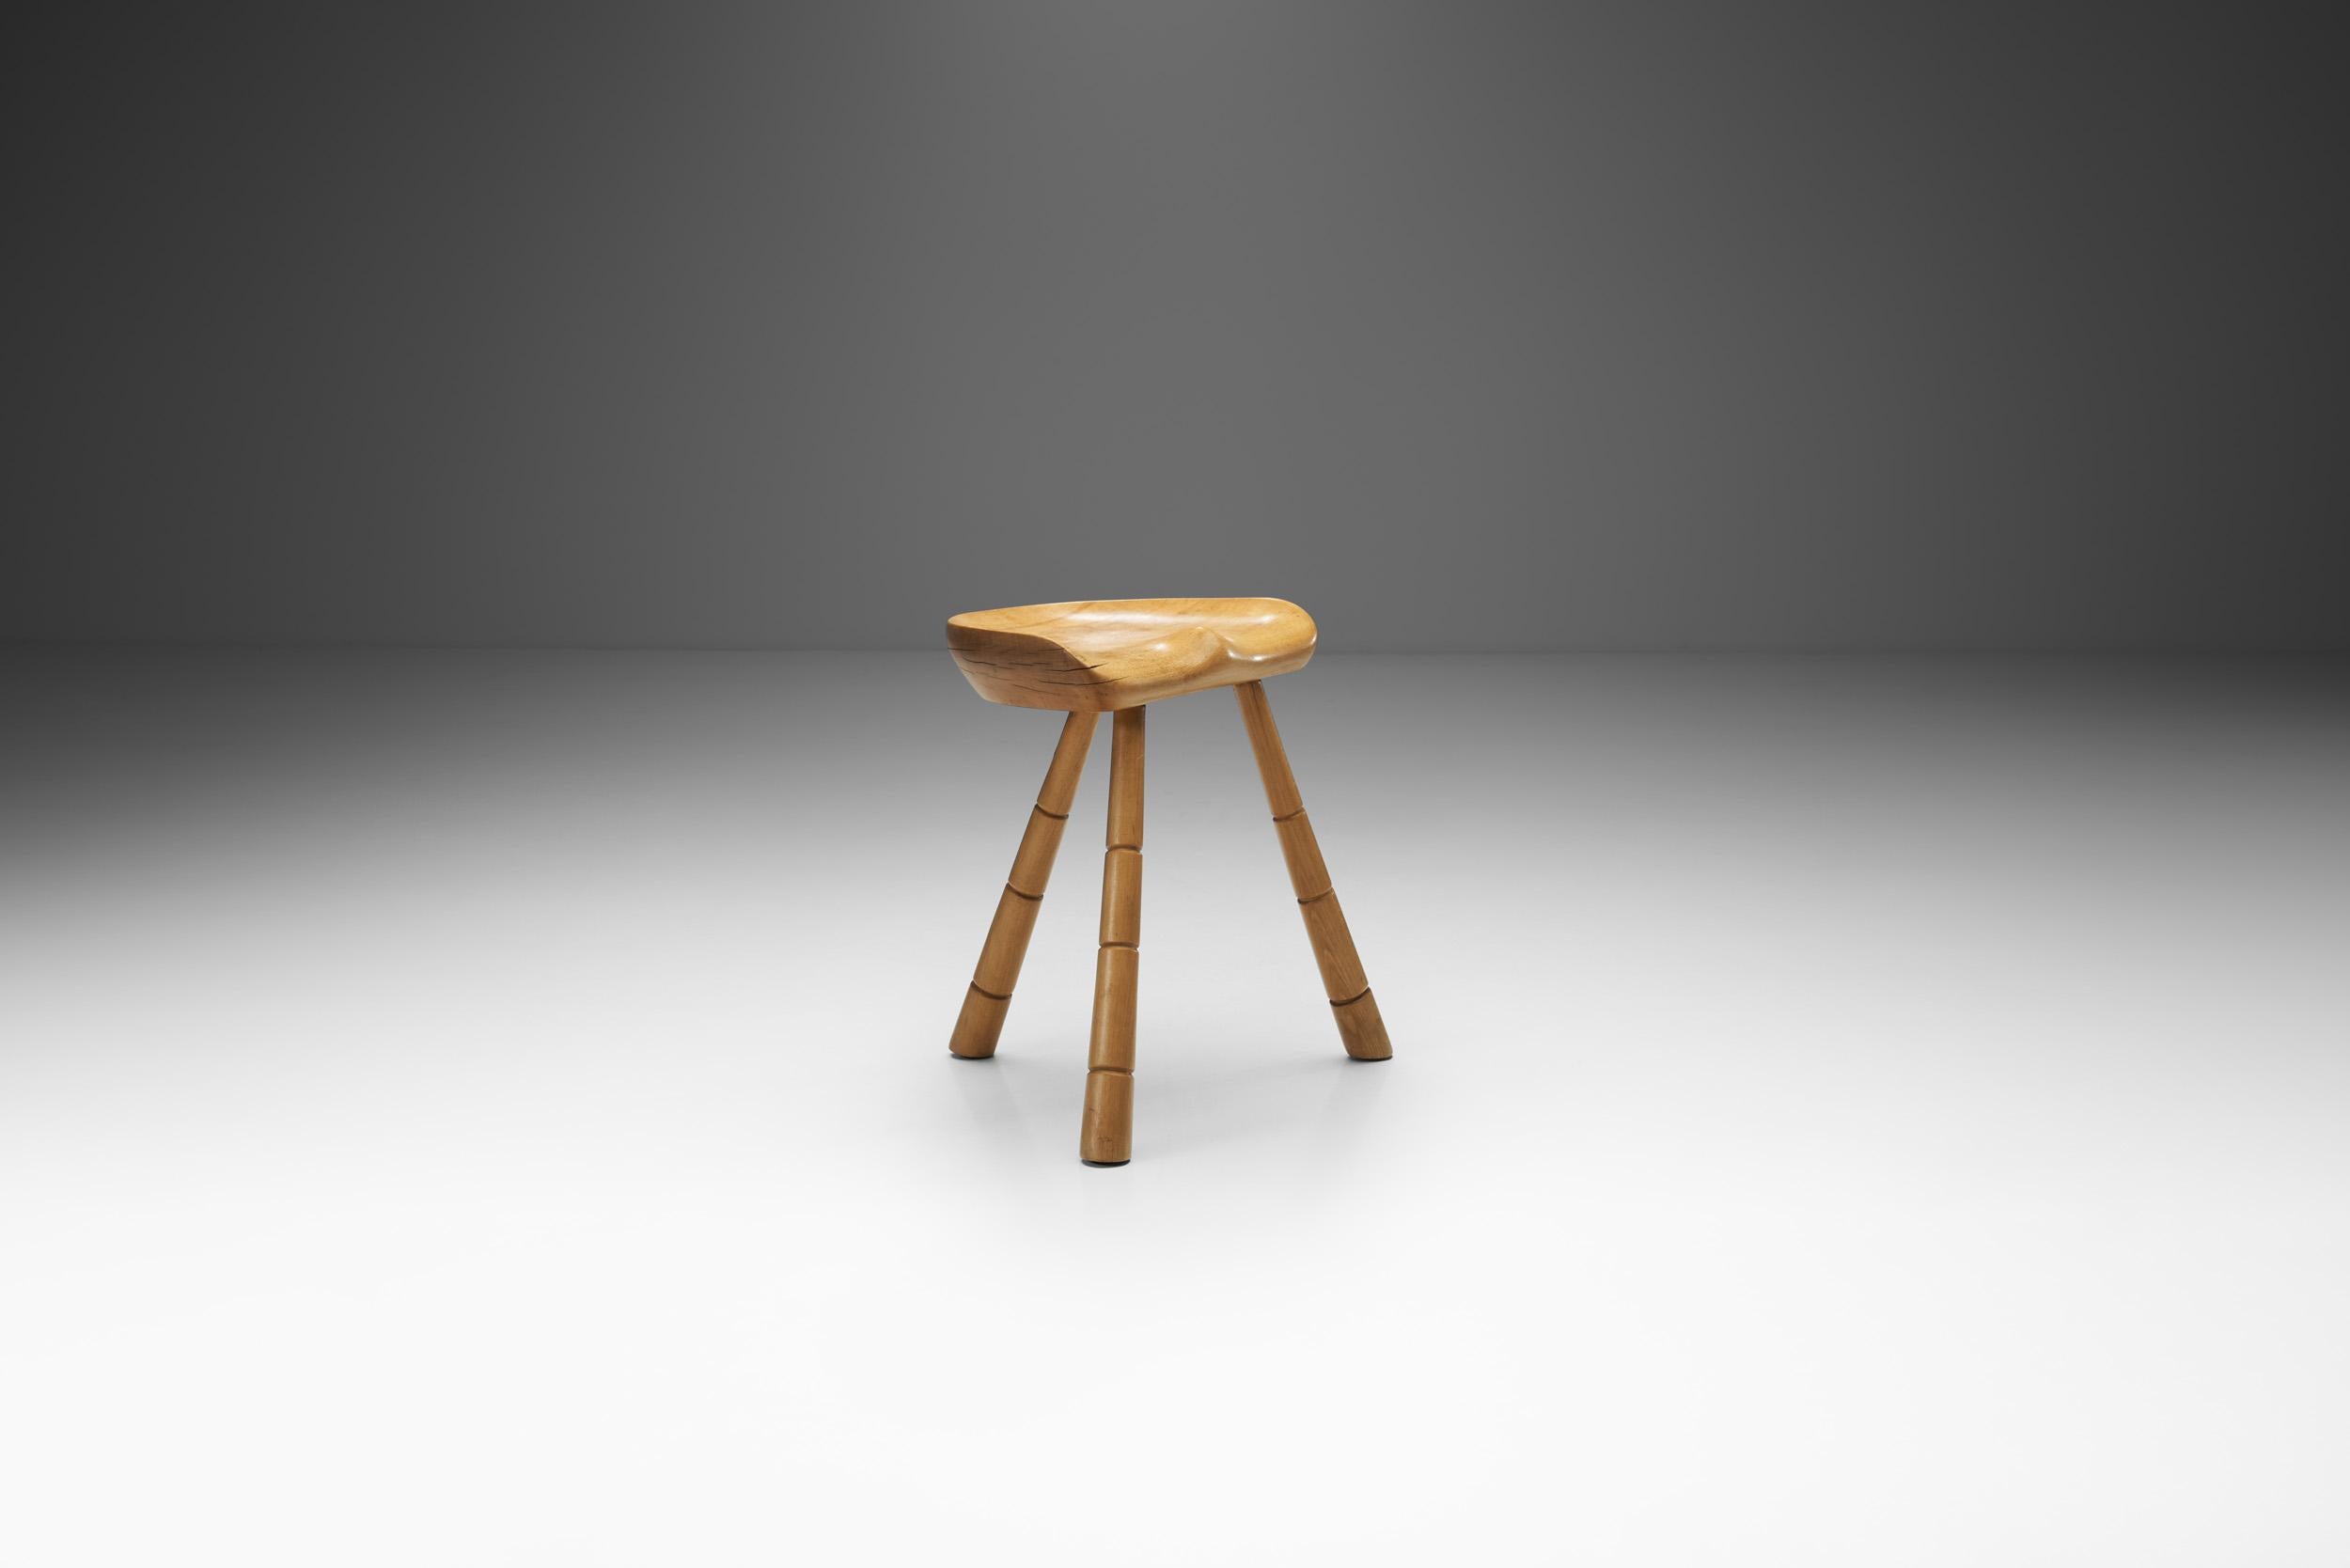 Functional design is the evident guiding principle of many Scandinavian pieces from the early mid-century, and there is hardly a better example than this milking stool. In earlier days, similar stools were often used in the home for informal